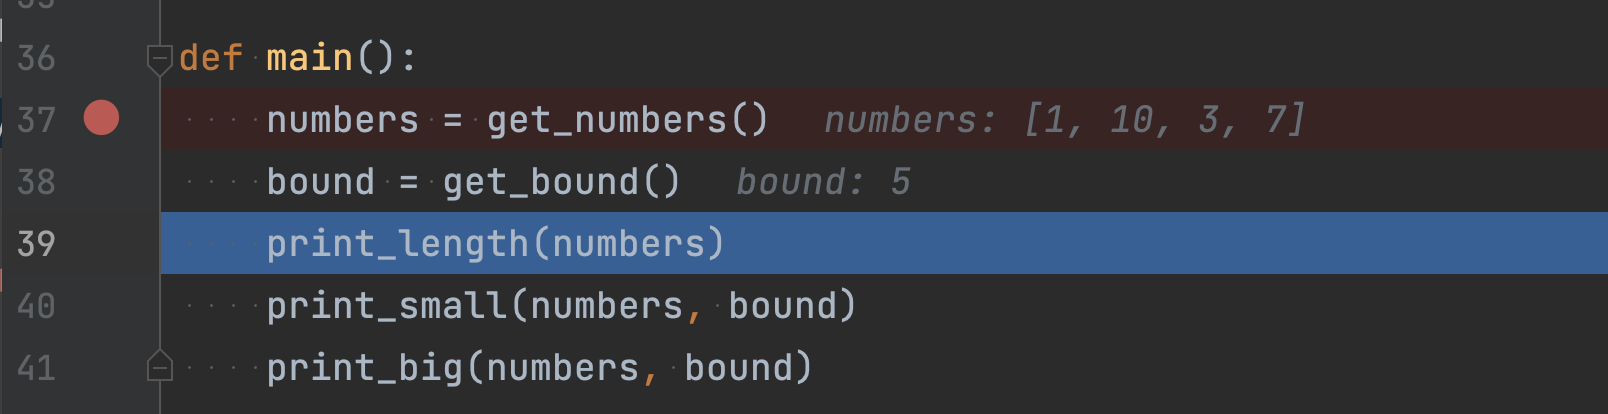 get_numbers() returns a list of numbers -- 1, 10, 3, 7 -- and get_bound() returns 5